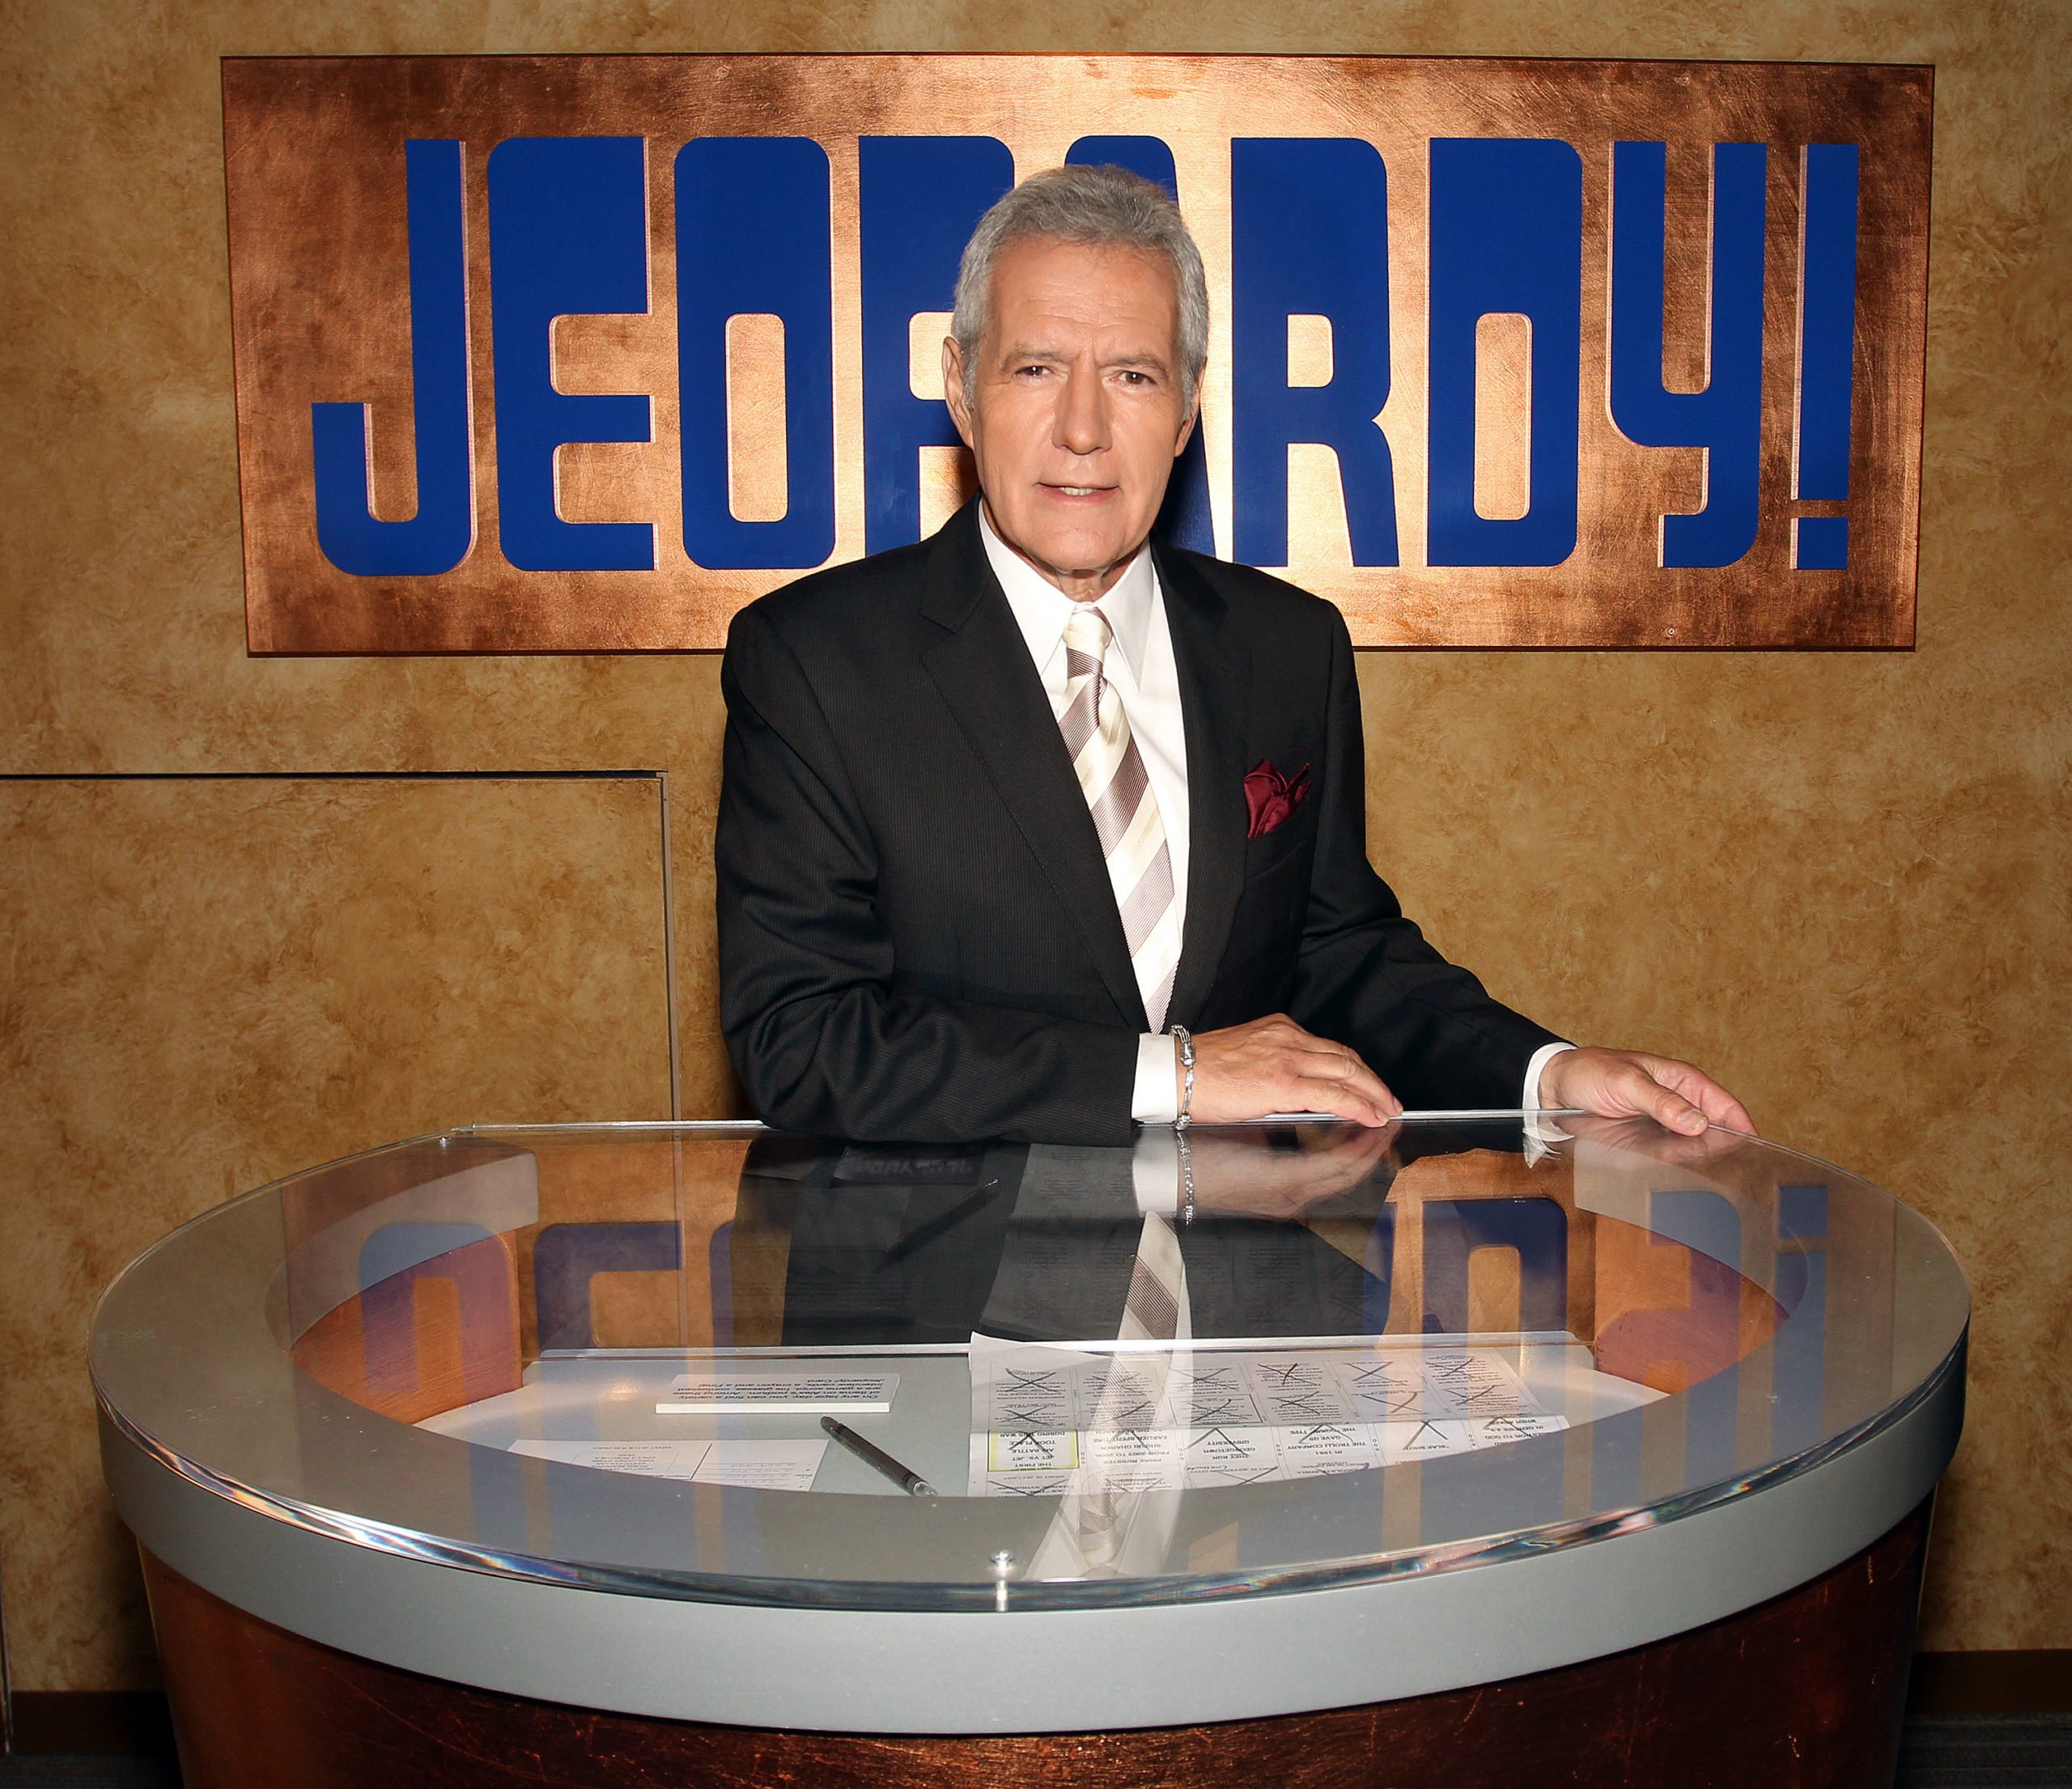 CULVER CITY, CA - SEPTEMBER 20: Host Alex Trebek poses on the set at Sony Pictures for the 28th Season Premiere of the television show "Jeopardy" on September 20, 2011 in Culver City, California. (Photo by Frederick M. Brown/Getty Images)